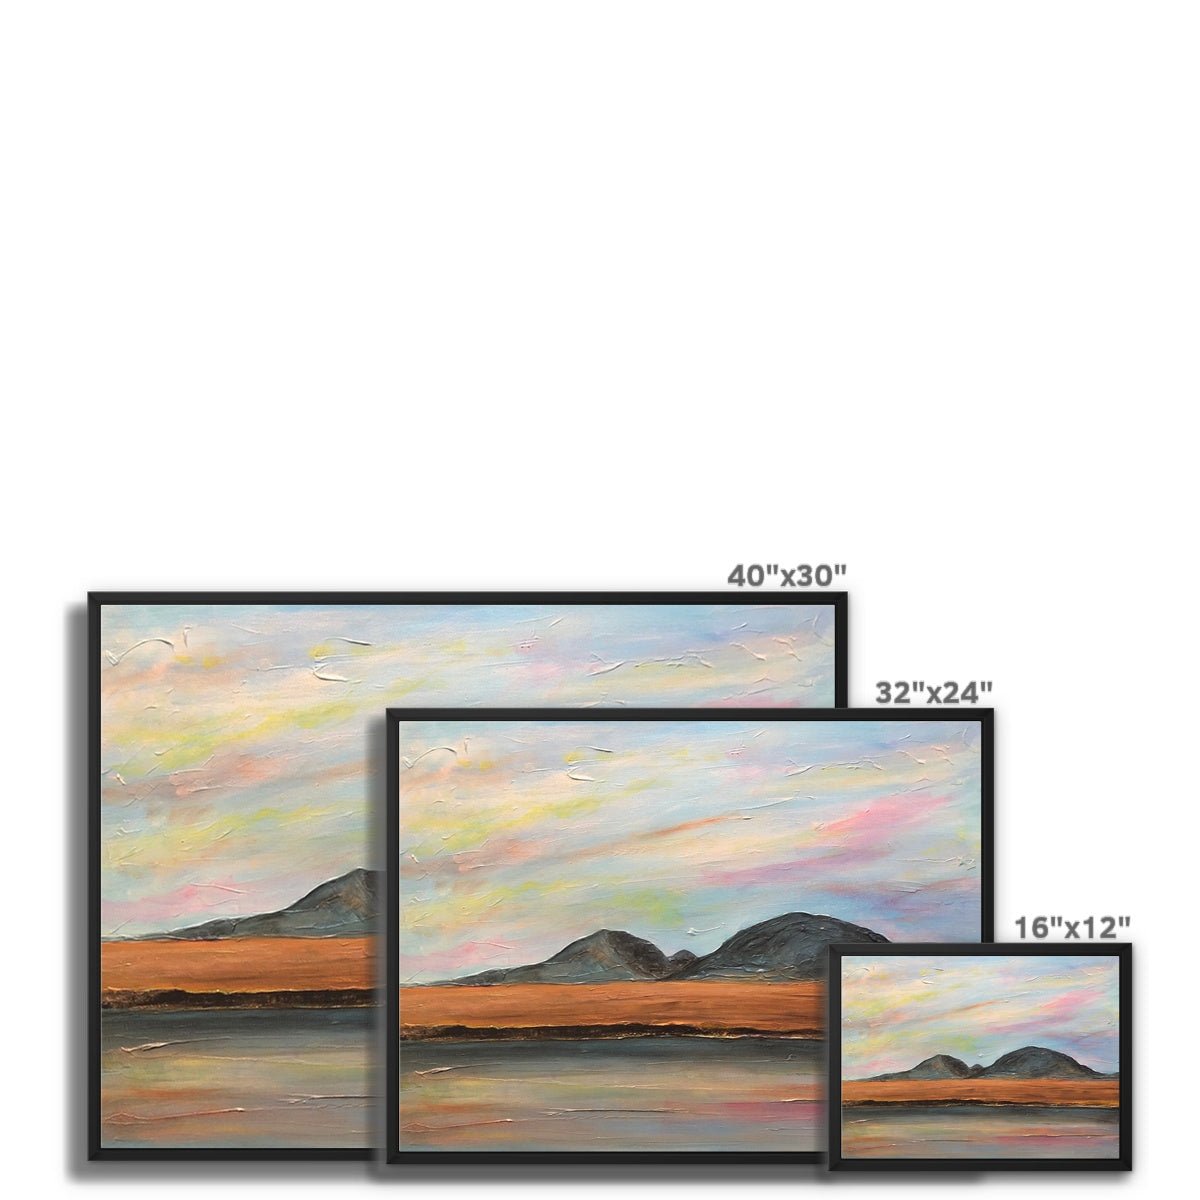 Jura Dawn Painting | Framed Canvas From Scotland-Floating Framed Canvas Prints-Hebridean Islands Art Gallery-Paintings, Prints, Homeware, Art Gifts From Scotland By Scottish Artist Kevin Hunter